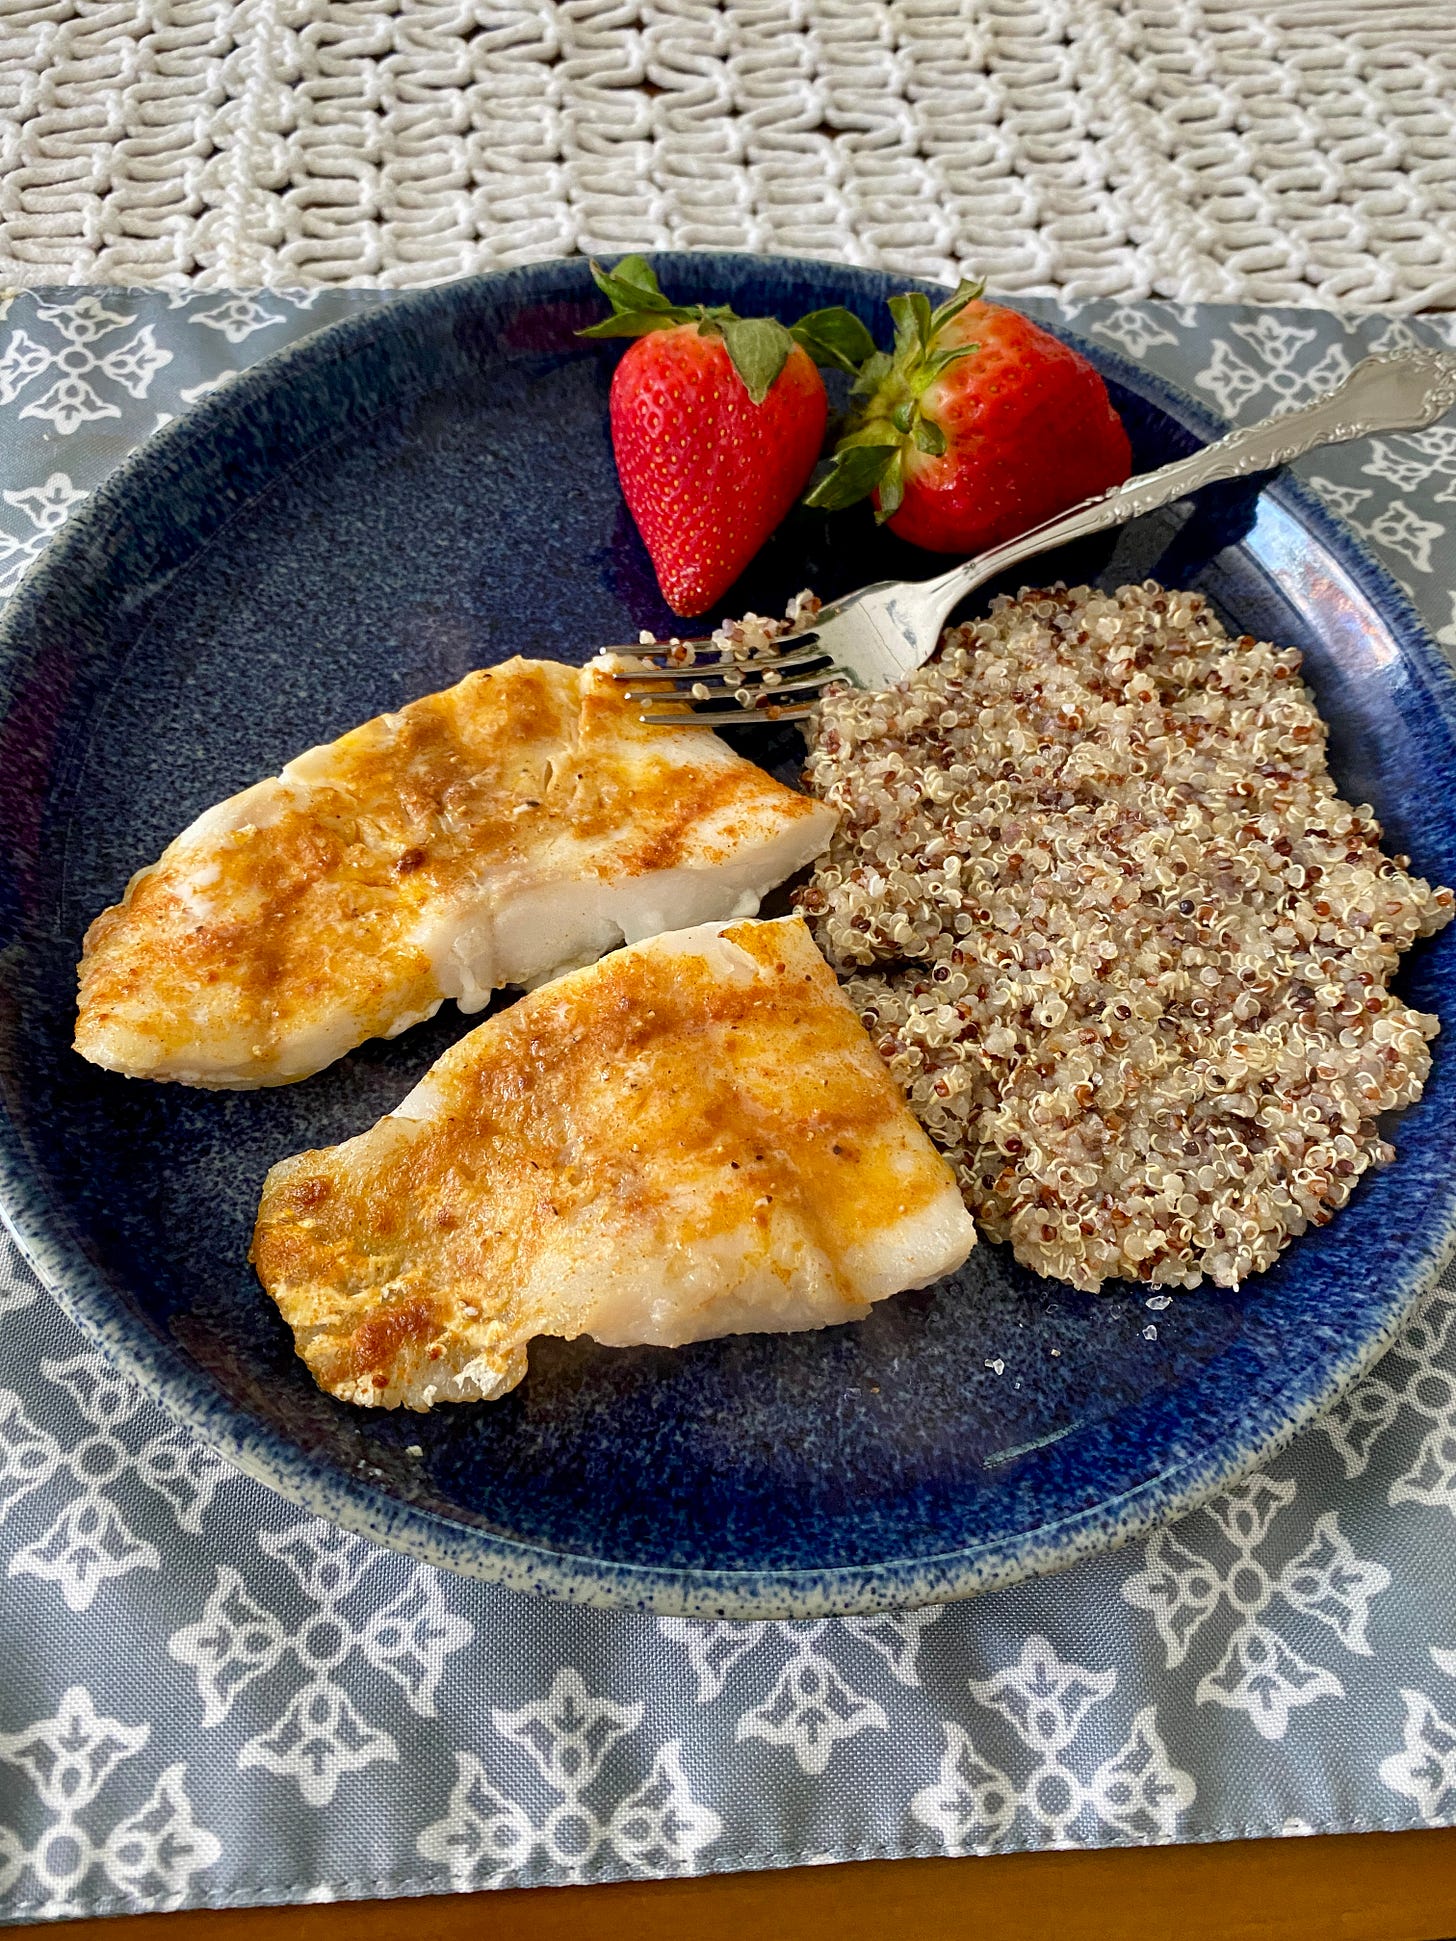 A photo of a dark blue plate sitting on a wooden table with a light blue and white placemat under it. On the plate are two pieces of cod fish, a pile of quinoa, and two strawberries.